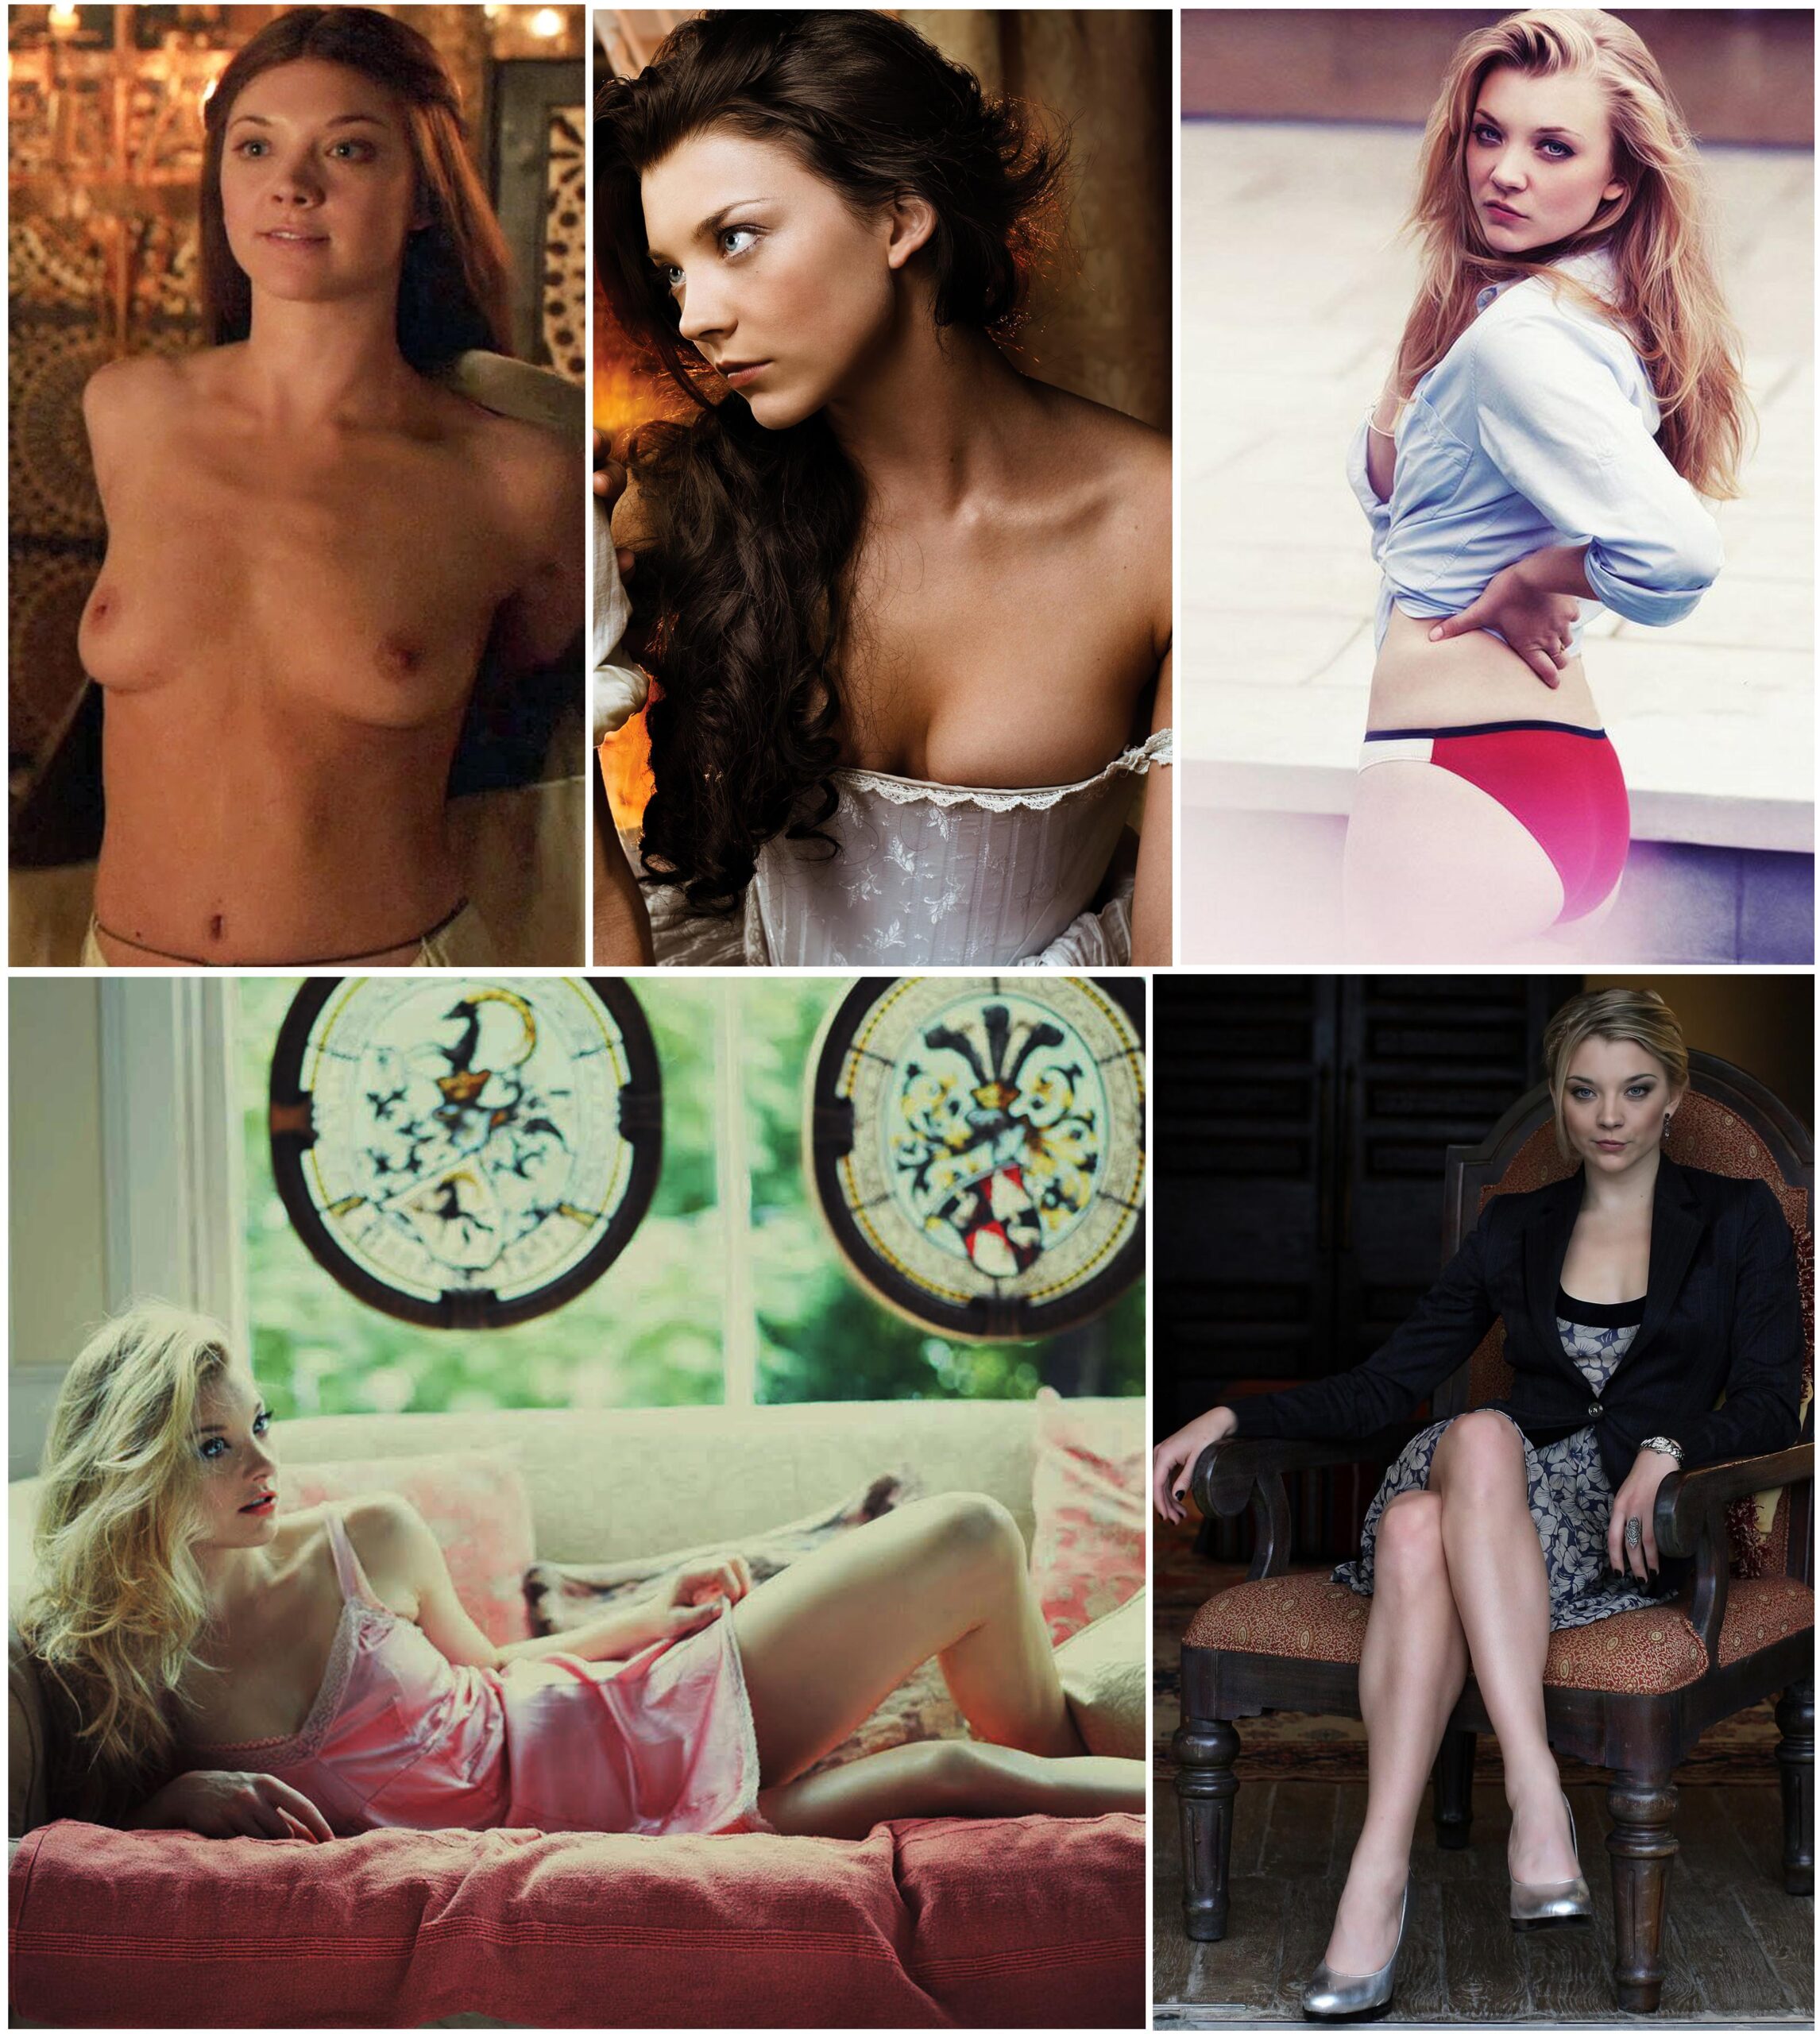 Would you rather dominate or submit to Natalie Dormer